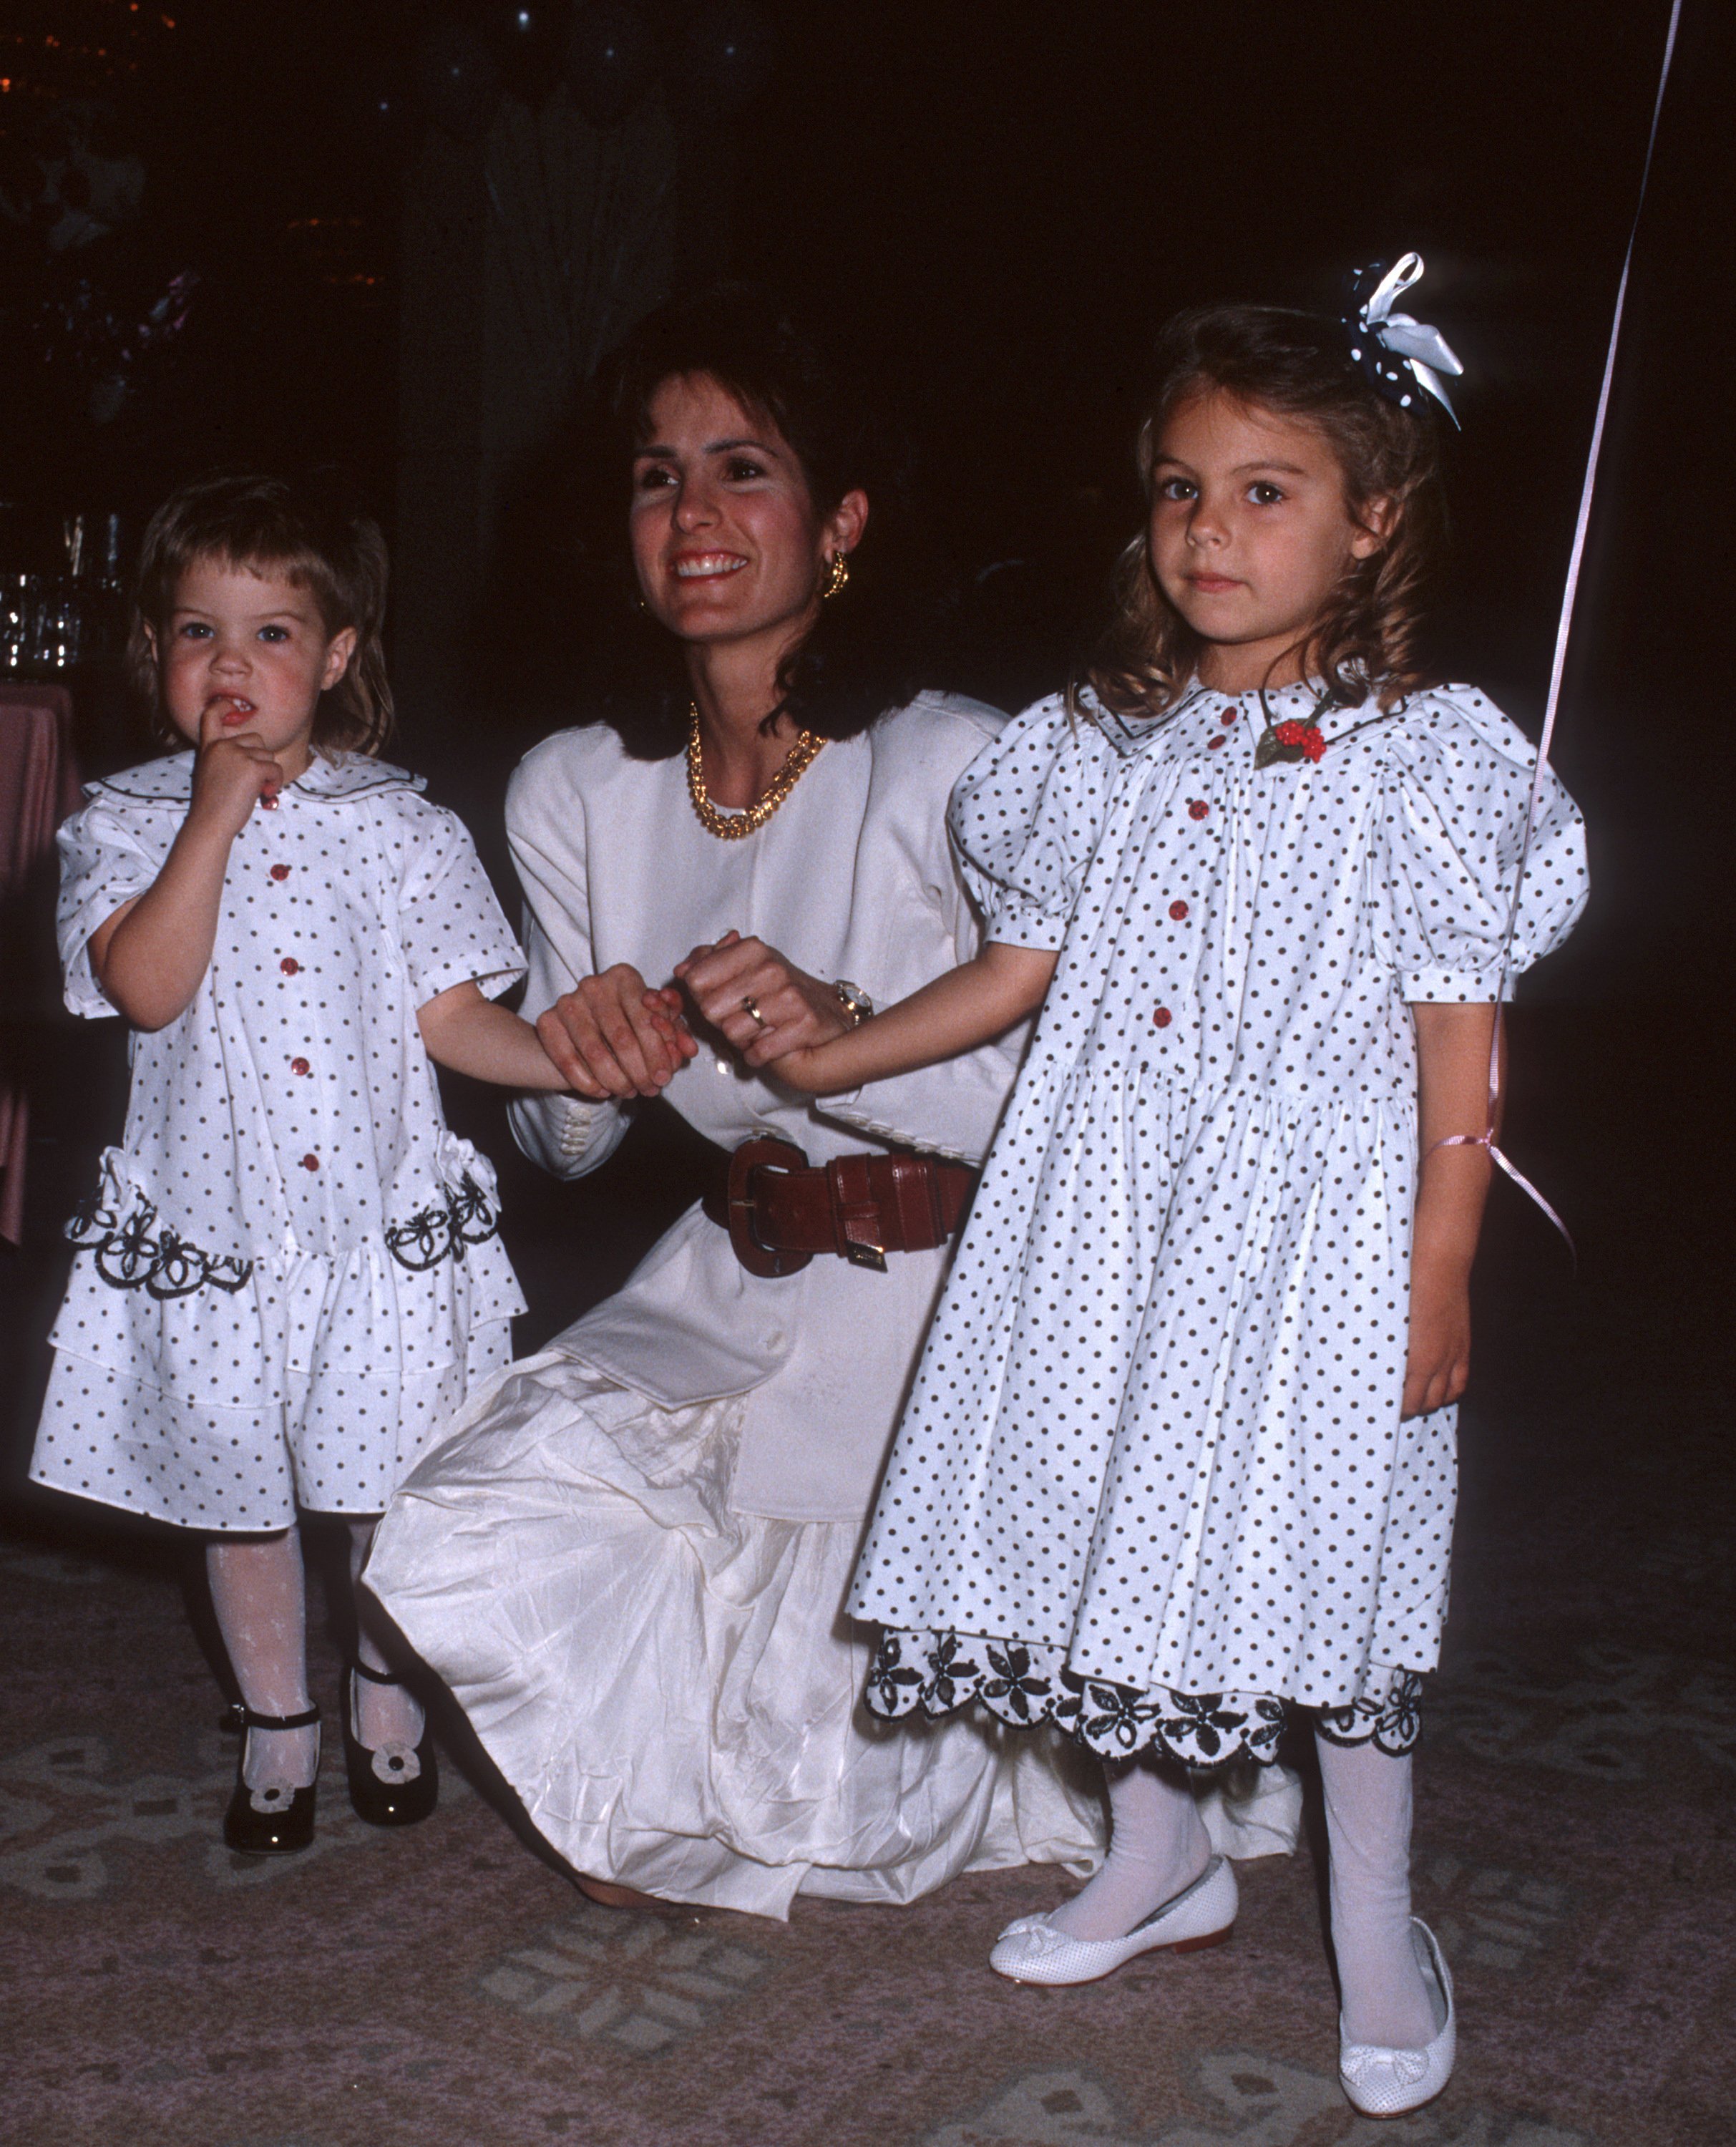 Cindy Costner with daughters Lily Costner and Annie Costner on March 23, 1989 | Source: Getty Images